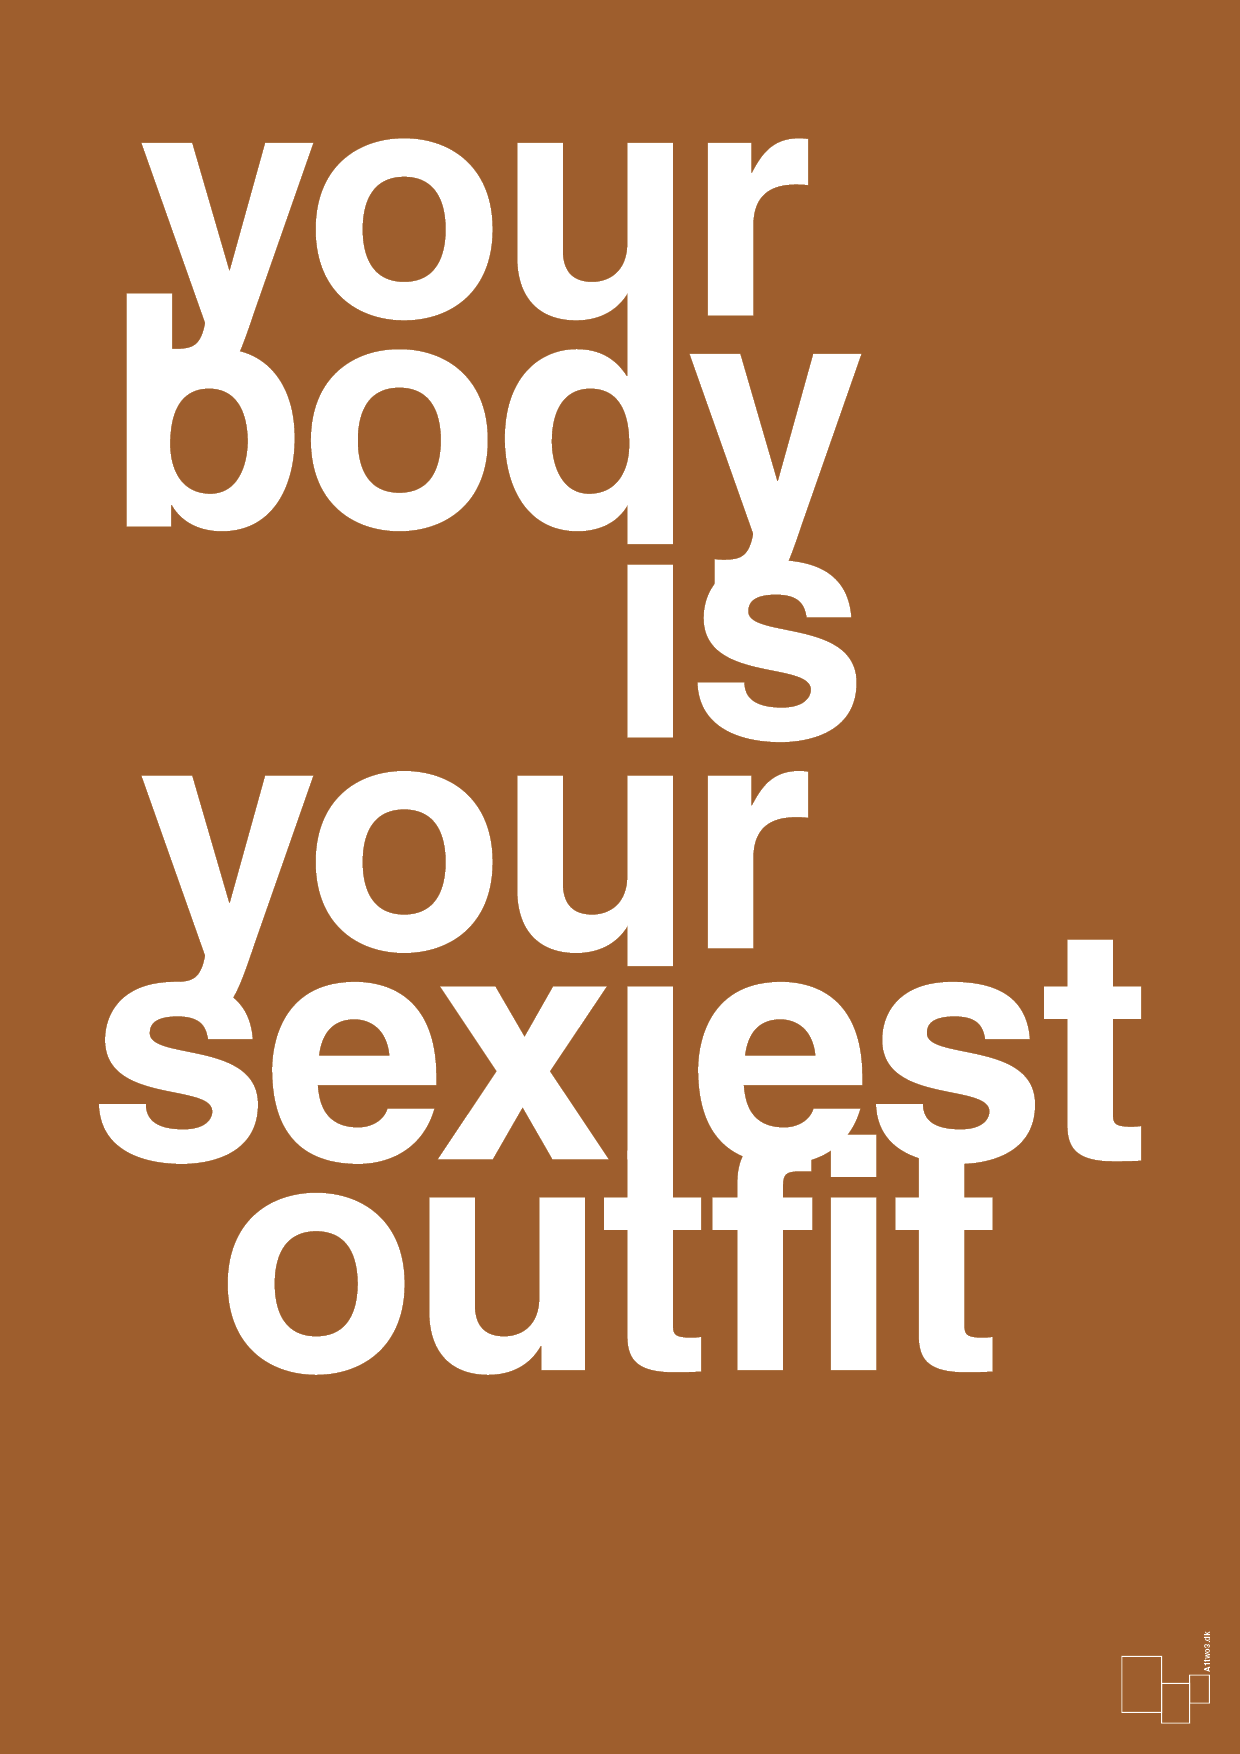 your body is your sexiest outfit - Plakat med Sport & Fritid i Cognac